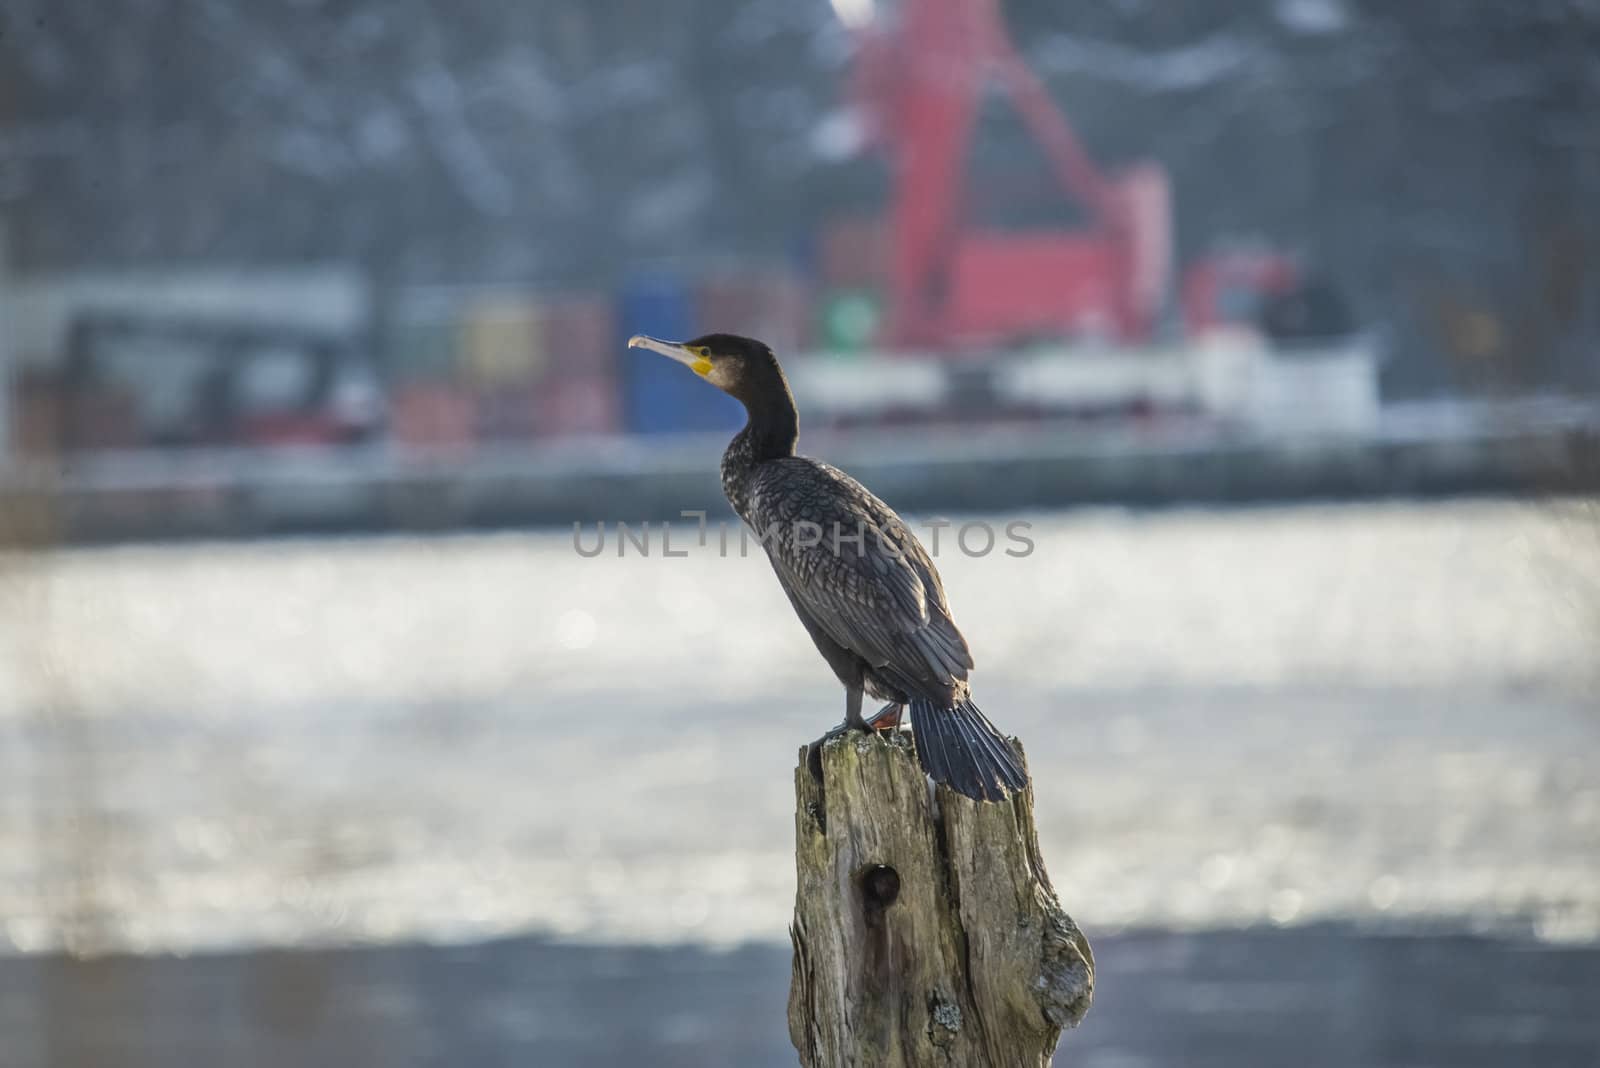 great cormorant sitting on a pole into the river in the sunshine, the image is shot at the tista river in halden one day in february 2013